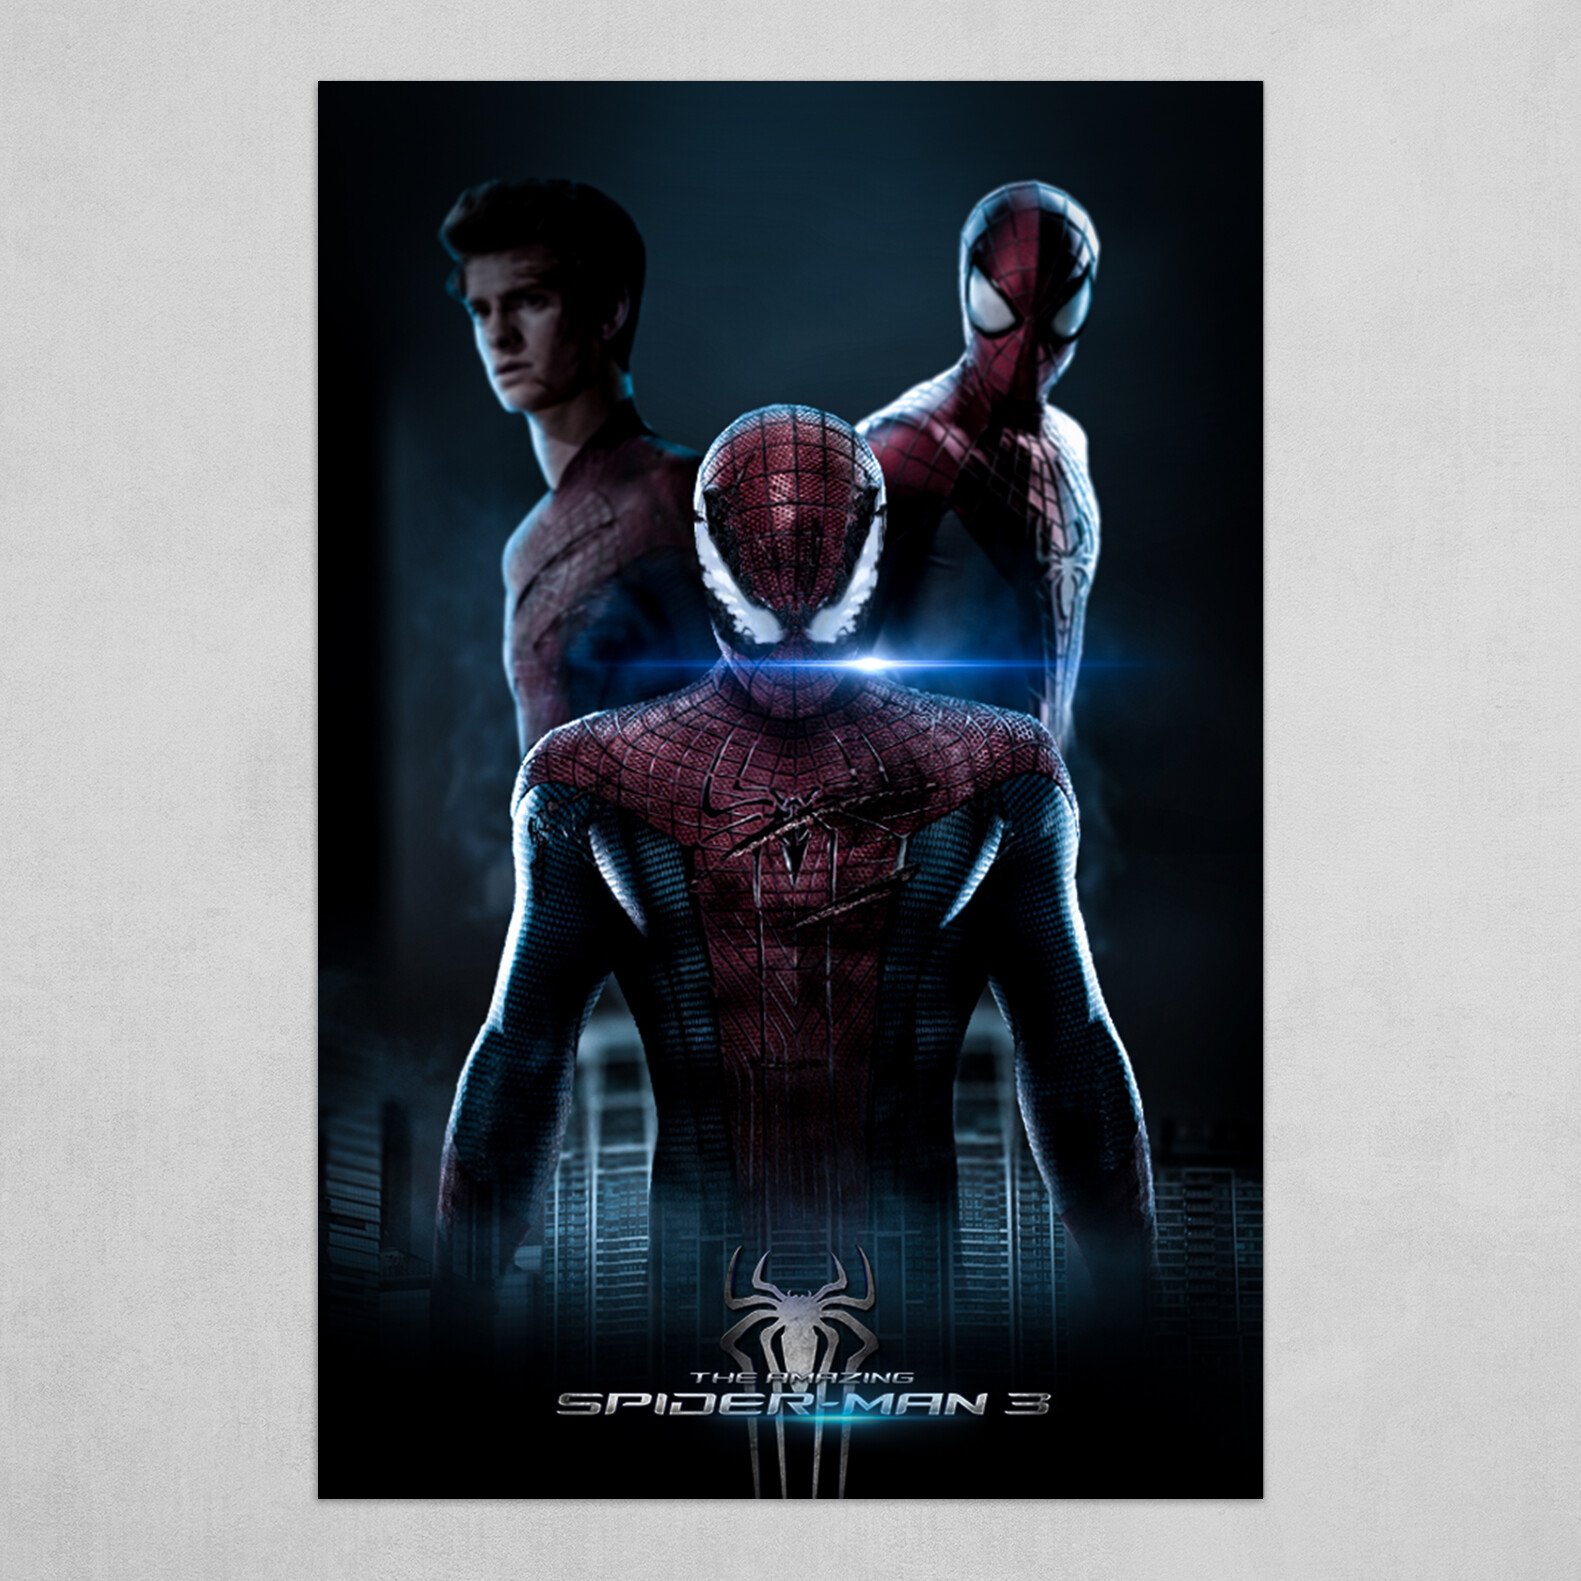 The Amazing Spider-man 3 Concept Poster by Ishan Dabi